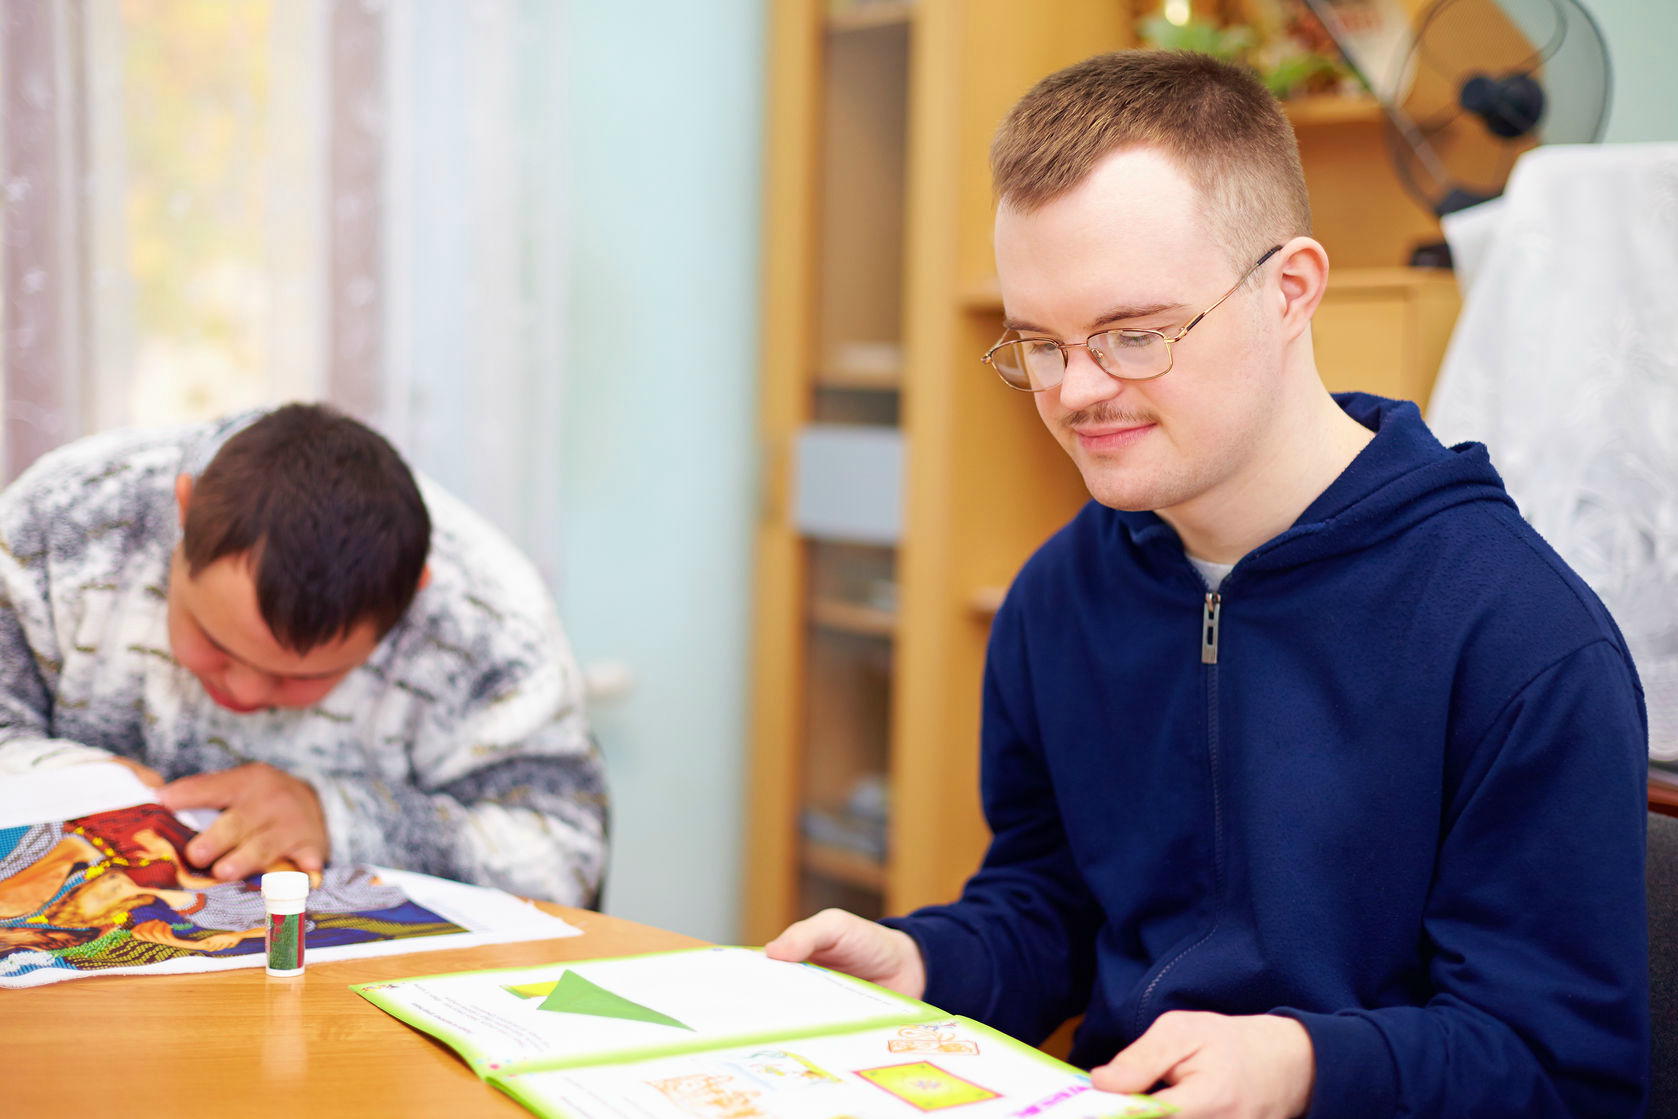 Course for Learners with Learning Difficulties and or Disabilities